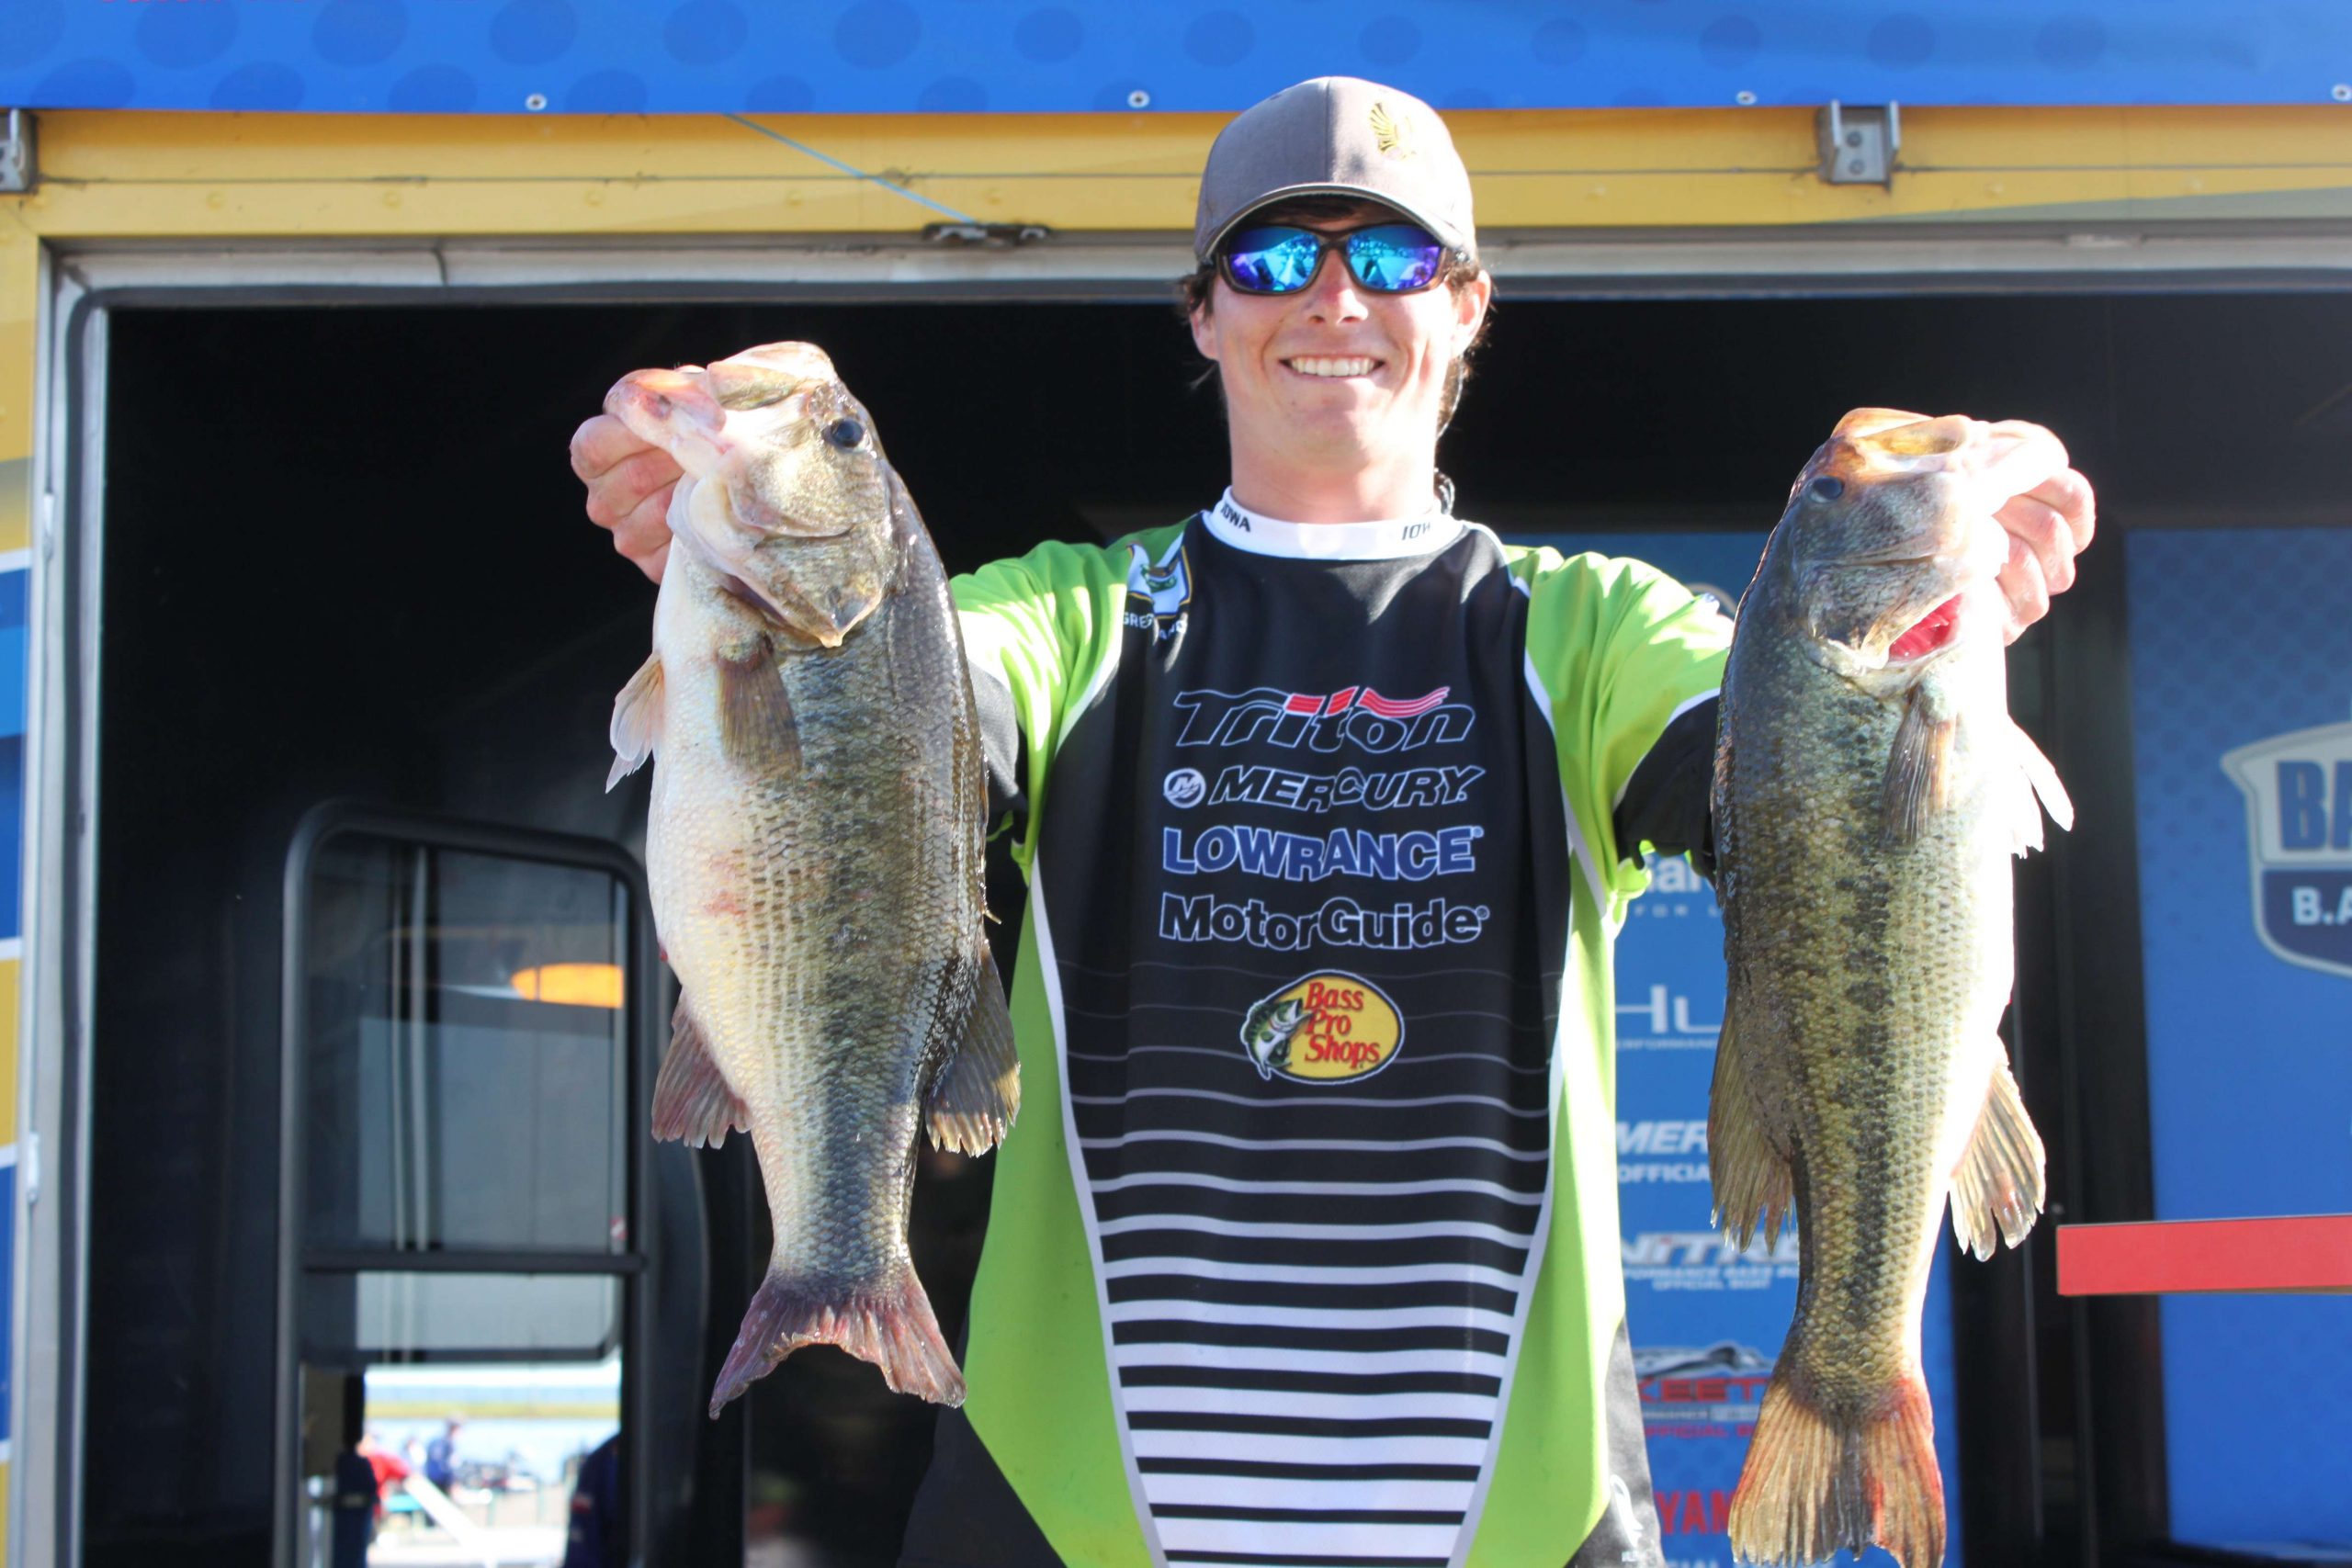 And that's this guy -- Greg Vance of Team Iowa. The young angler has put together a two-day total of 38-10. Here he shows two of the toads that were part of his 21-2 limit on Thursday.
